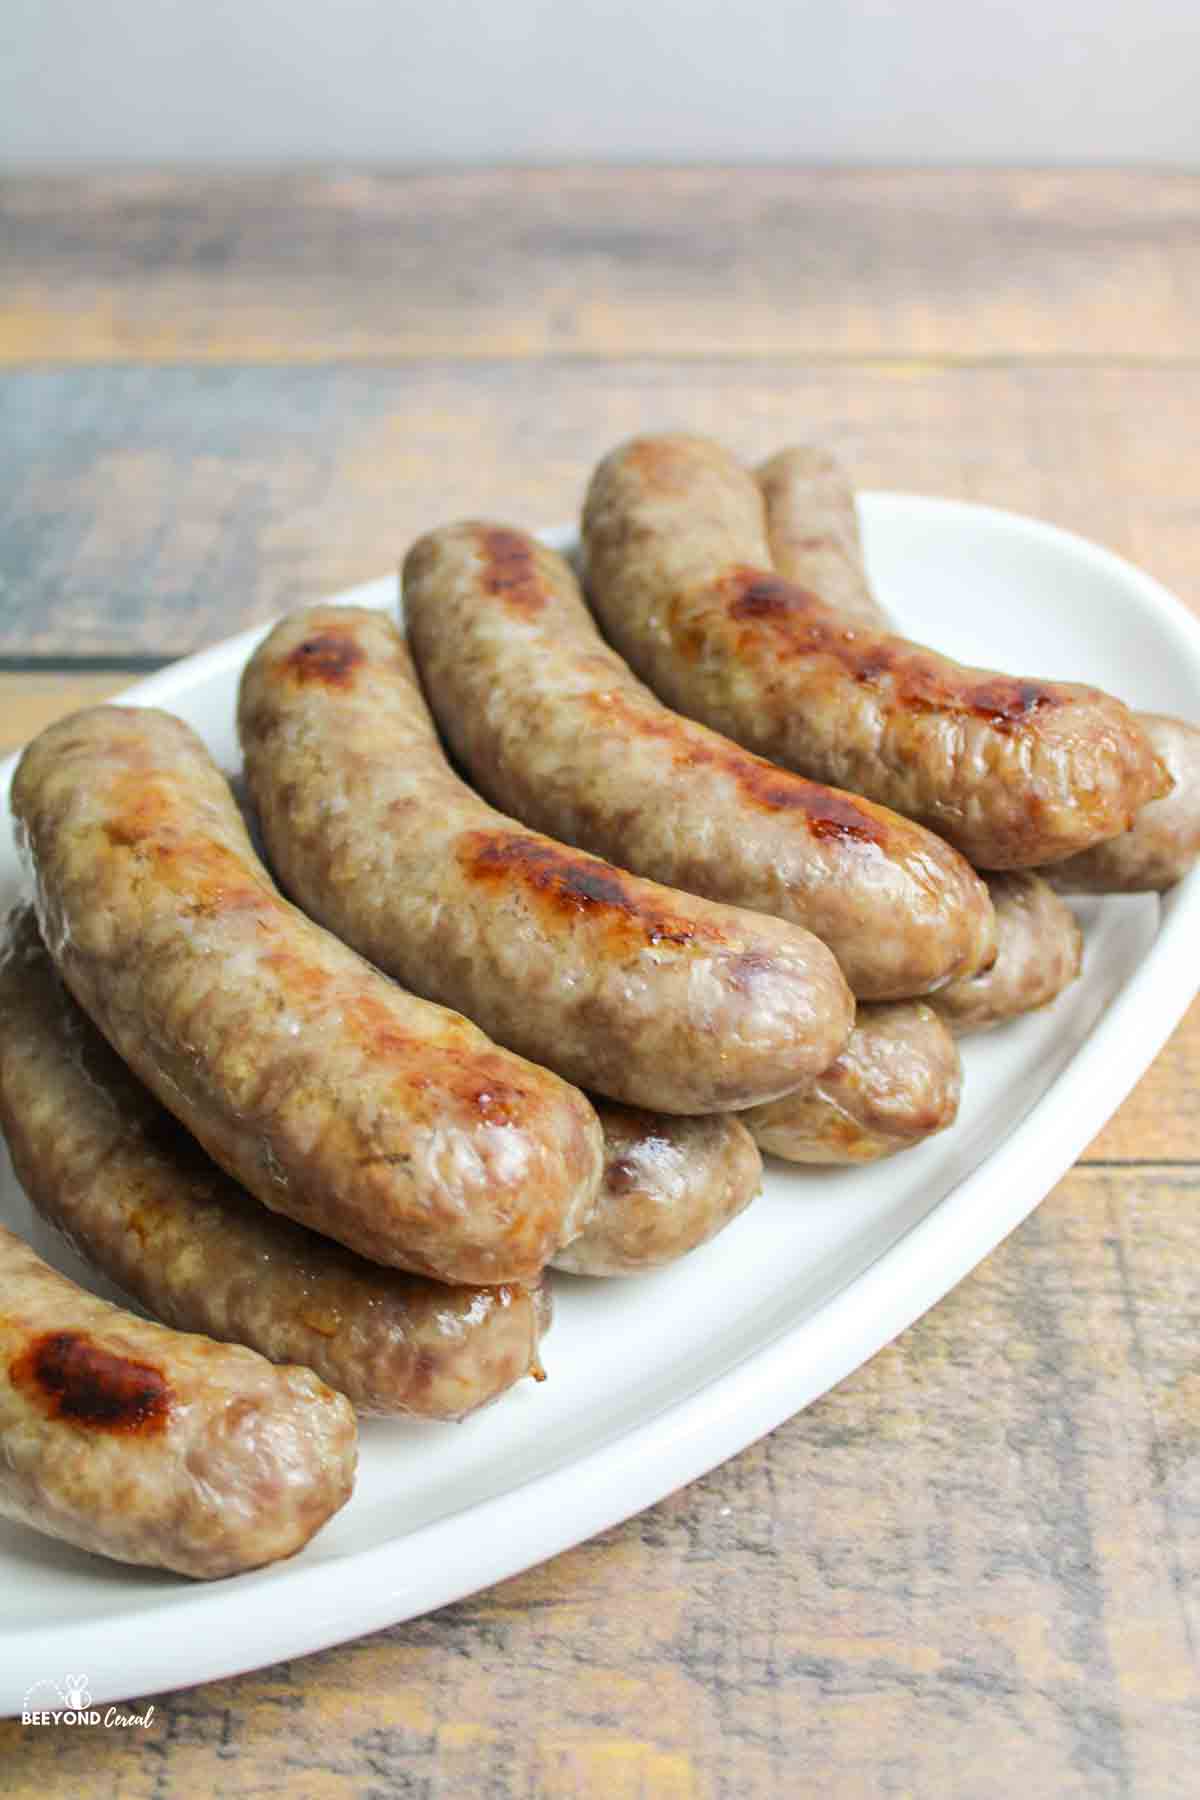 a platter full of brats turned at an angle